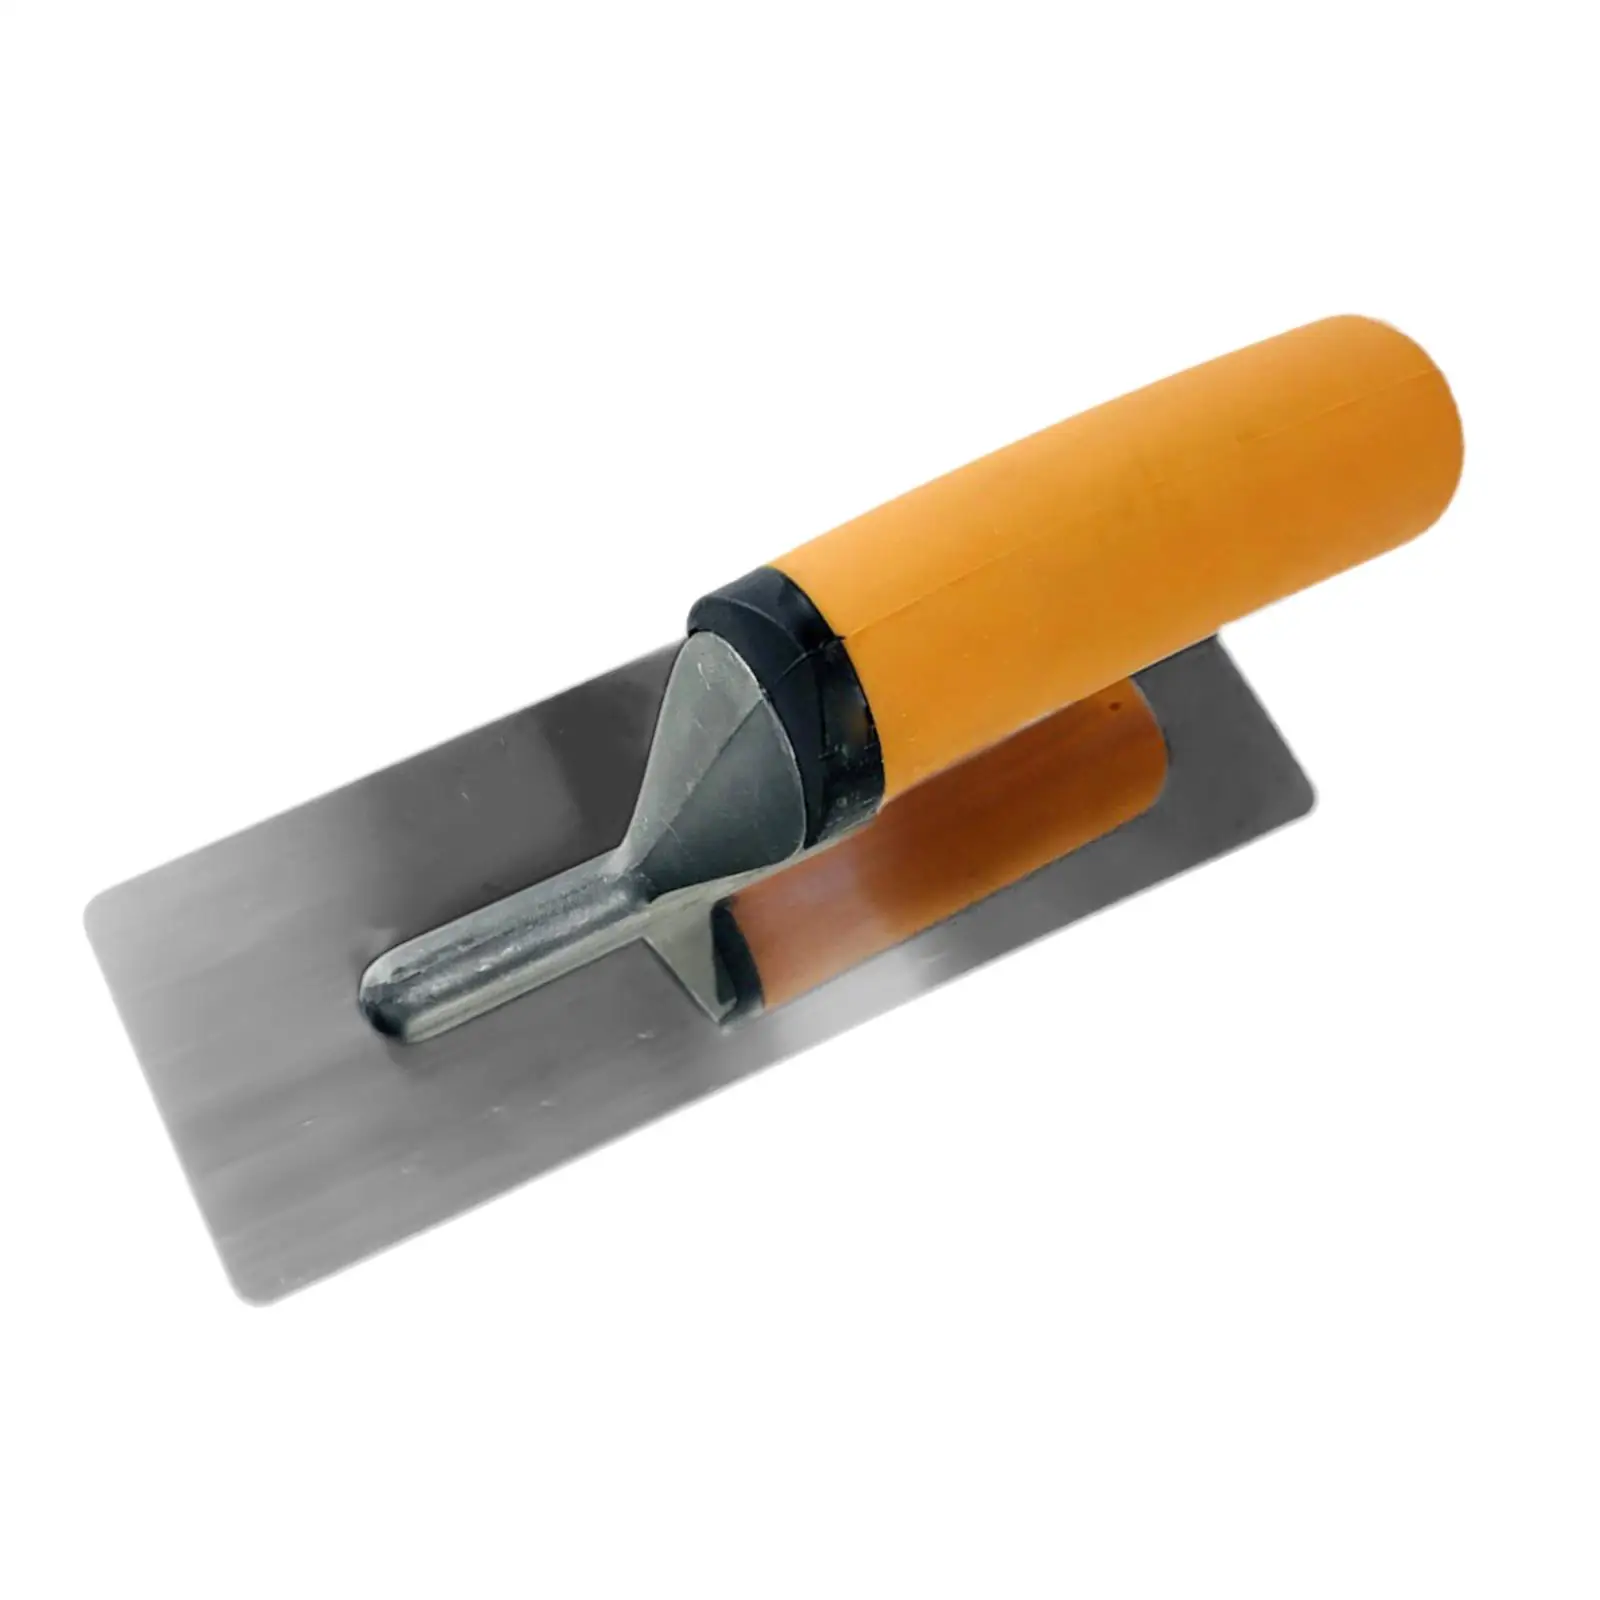 Drywall Trowel Lightweight Finishing Trowel for Stucco Plastering Concrete